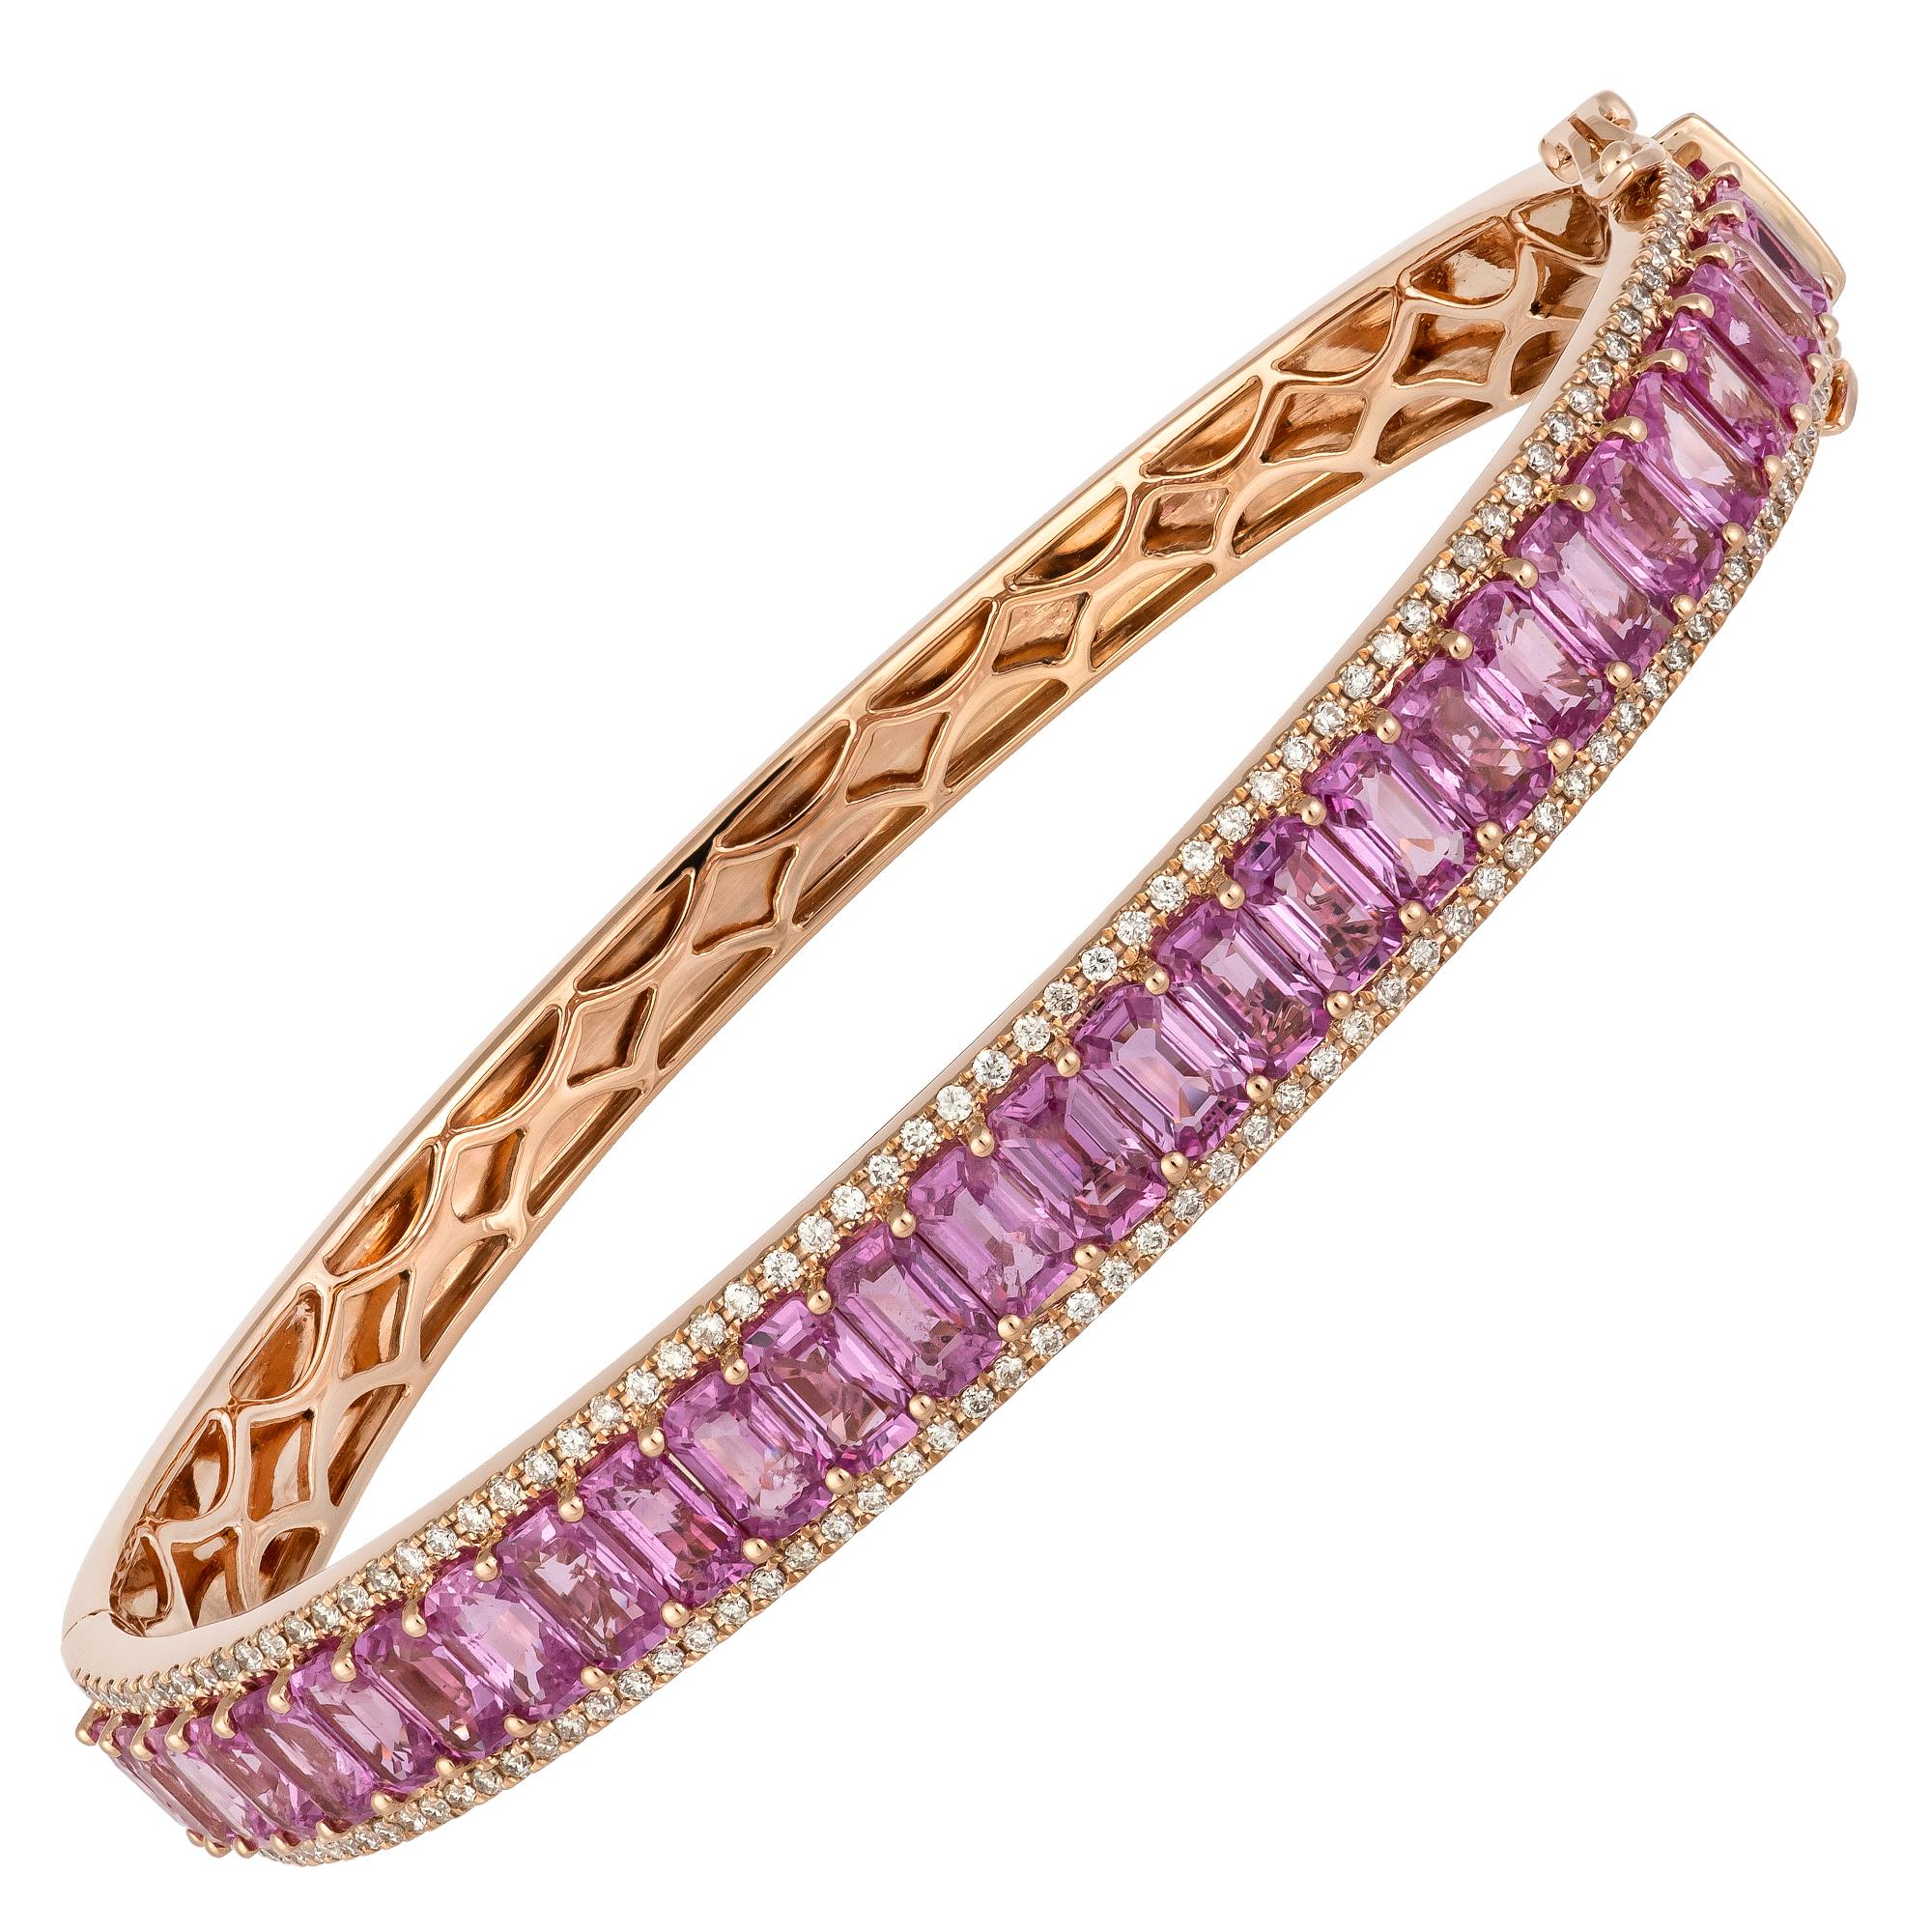 Diamond Tennis Bangle Bracelet 18k Rose Gold Diamond 0.77 Cts/130 Pcs Ps 8.88 Ct In New Condition For Sale In Montreux, CH